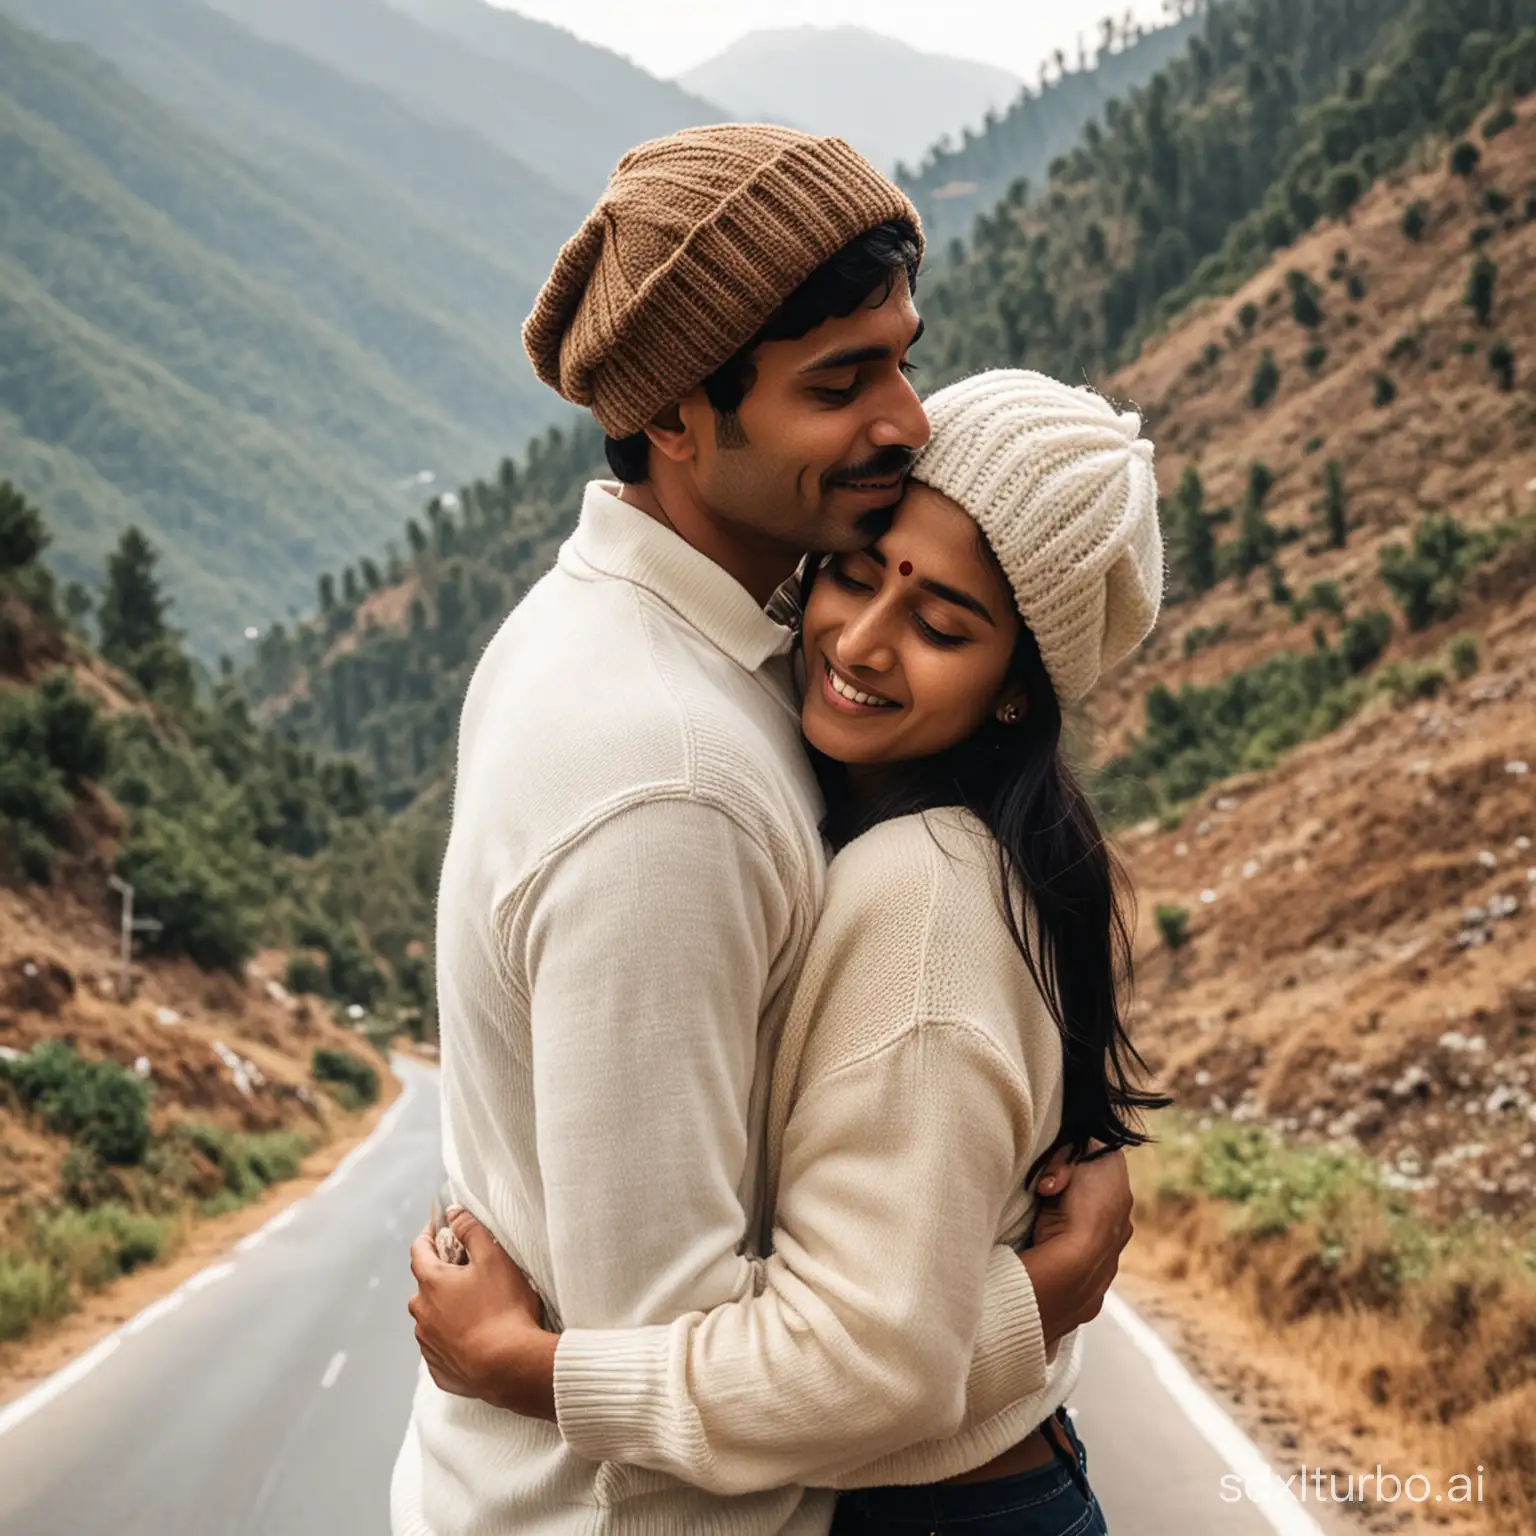 Indian 30 years old lady wearing jerkin and woolen cap hugging his husband wearing white shirt in a hill station road